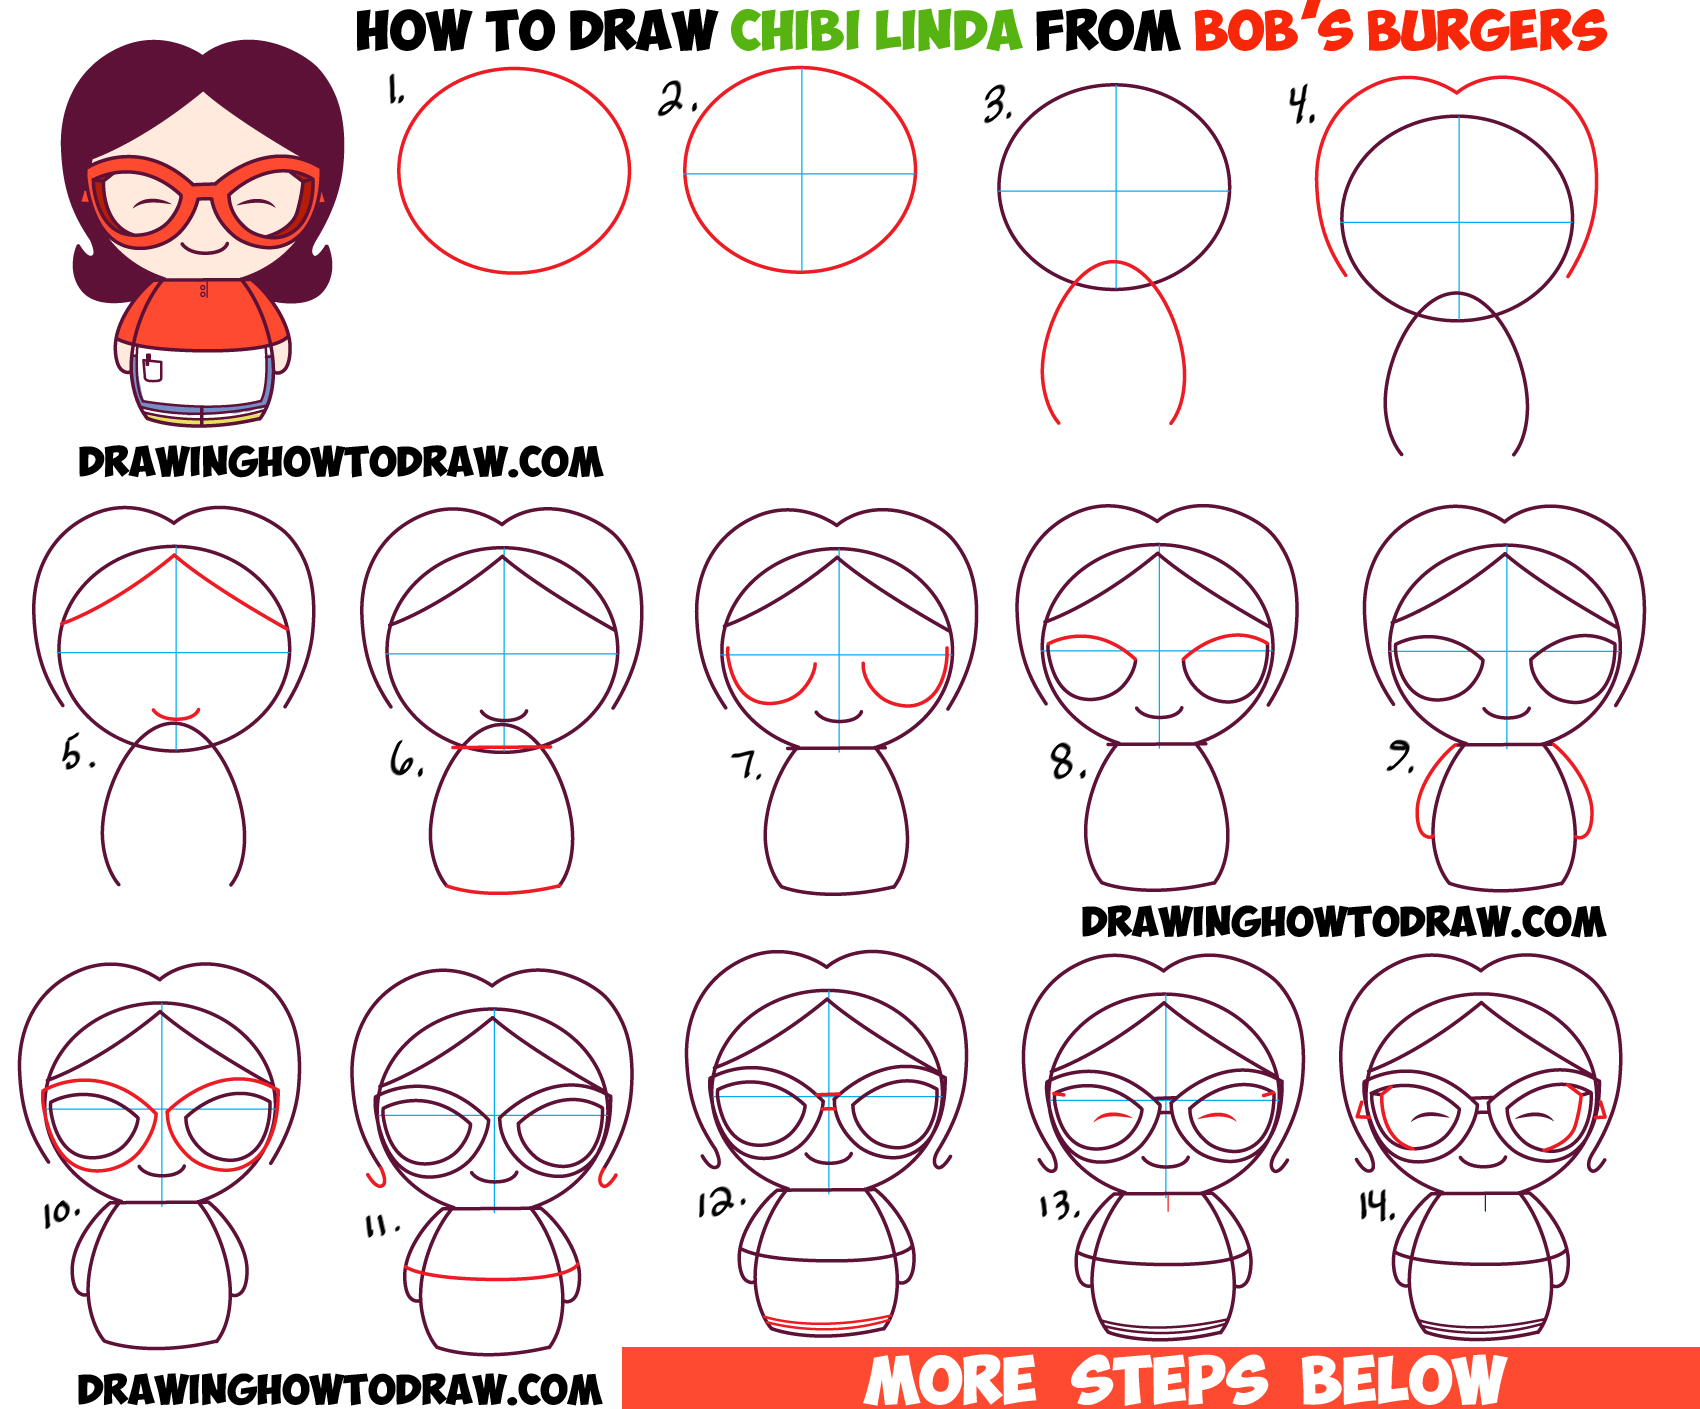 How to Draw Chibi Linda (Mom) from Bob's Burgers - Easy Steps Tutorial